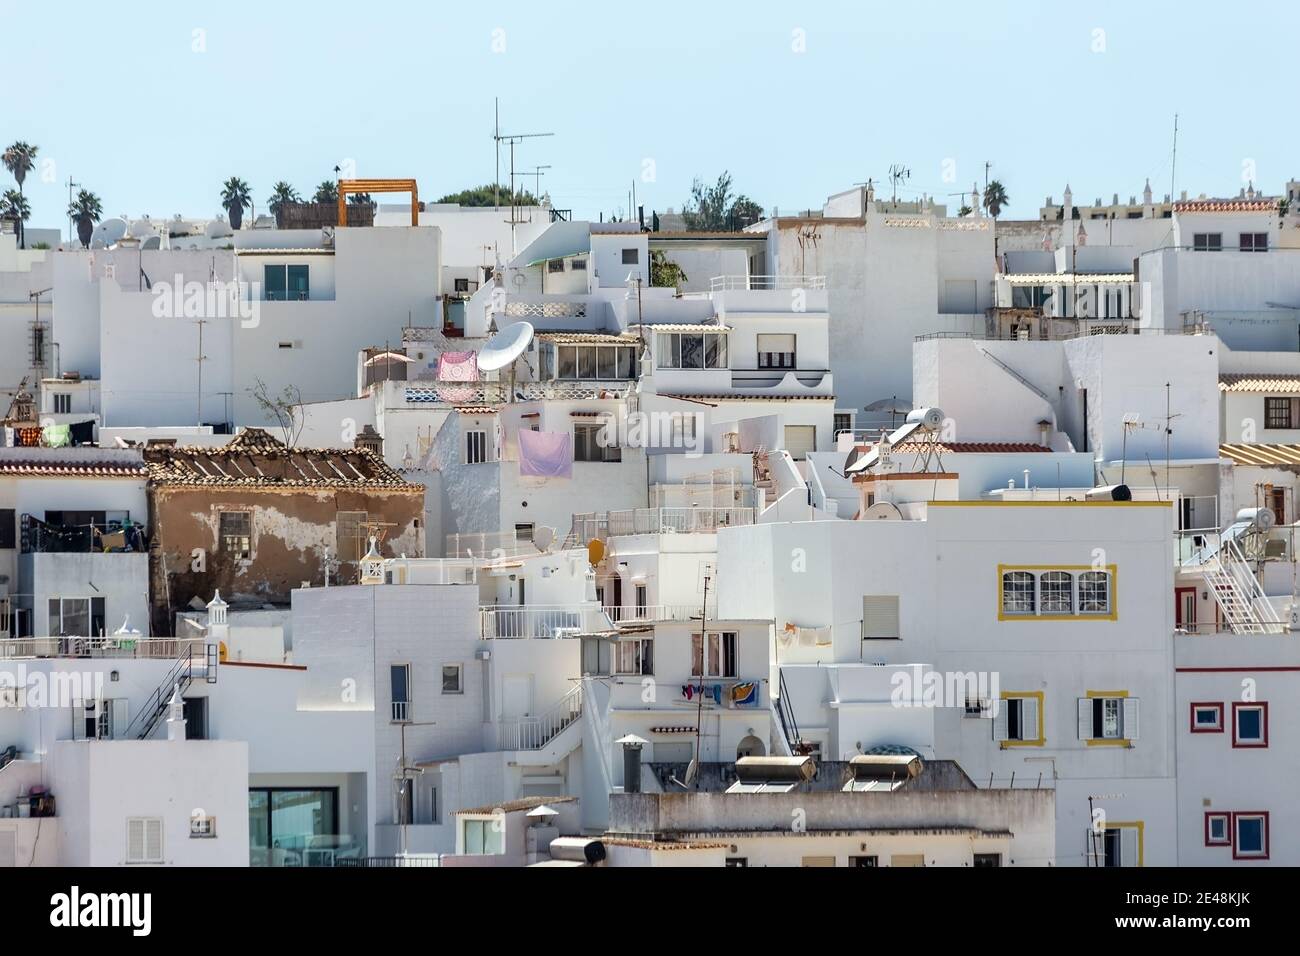 Urban photography of housing neighborhood in highly populated region of Praia dos Pecadores, Albufeira, Portugal. Stock Photo